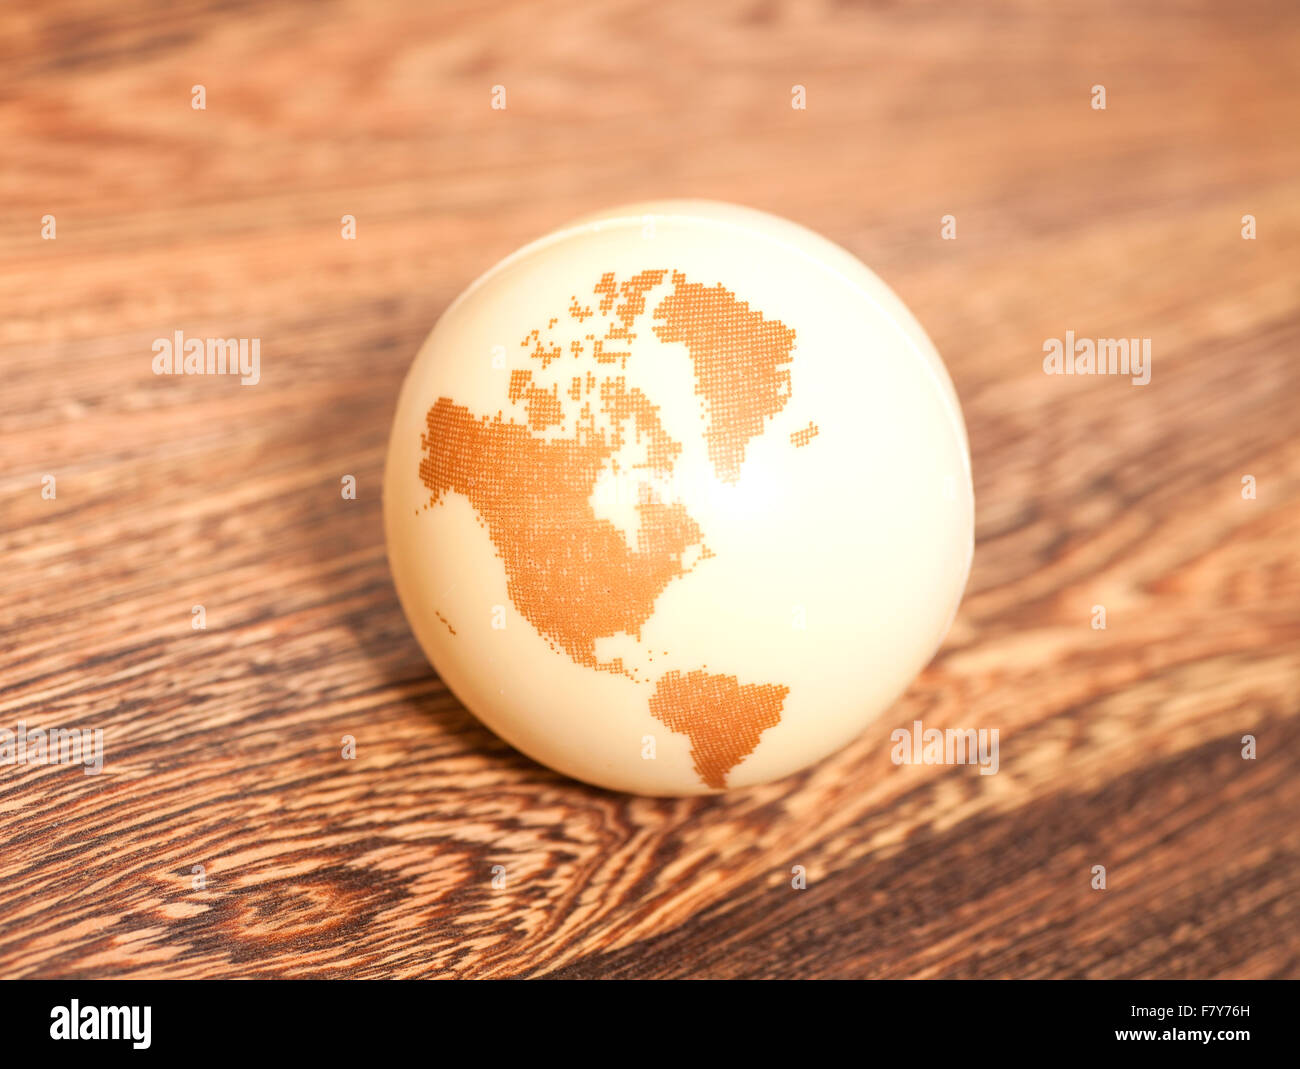 Earth Globe on wooden background Stock Photo